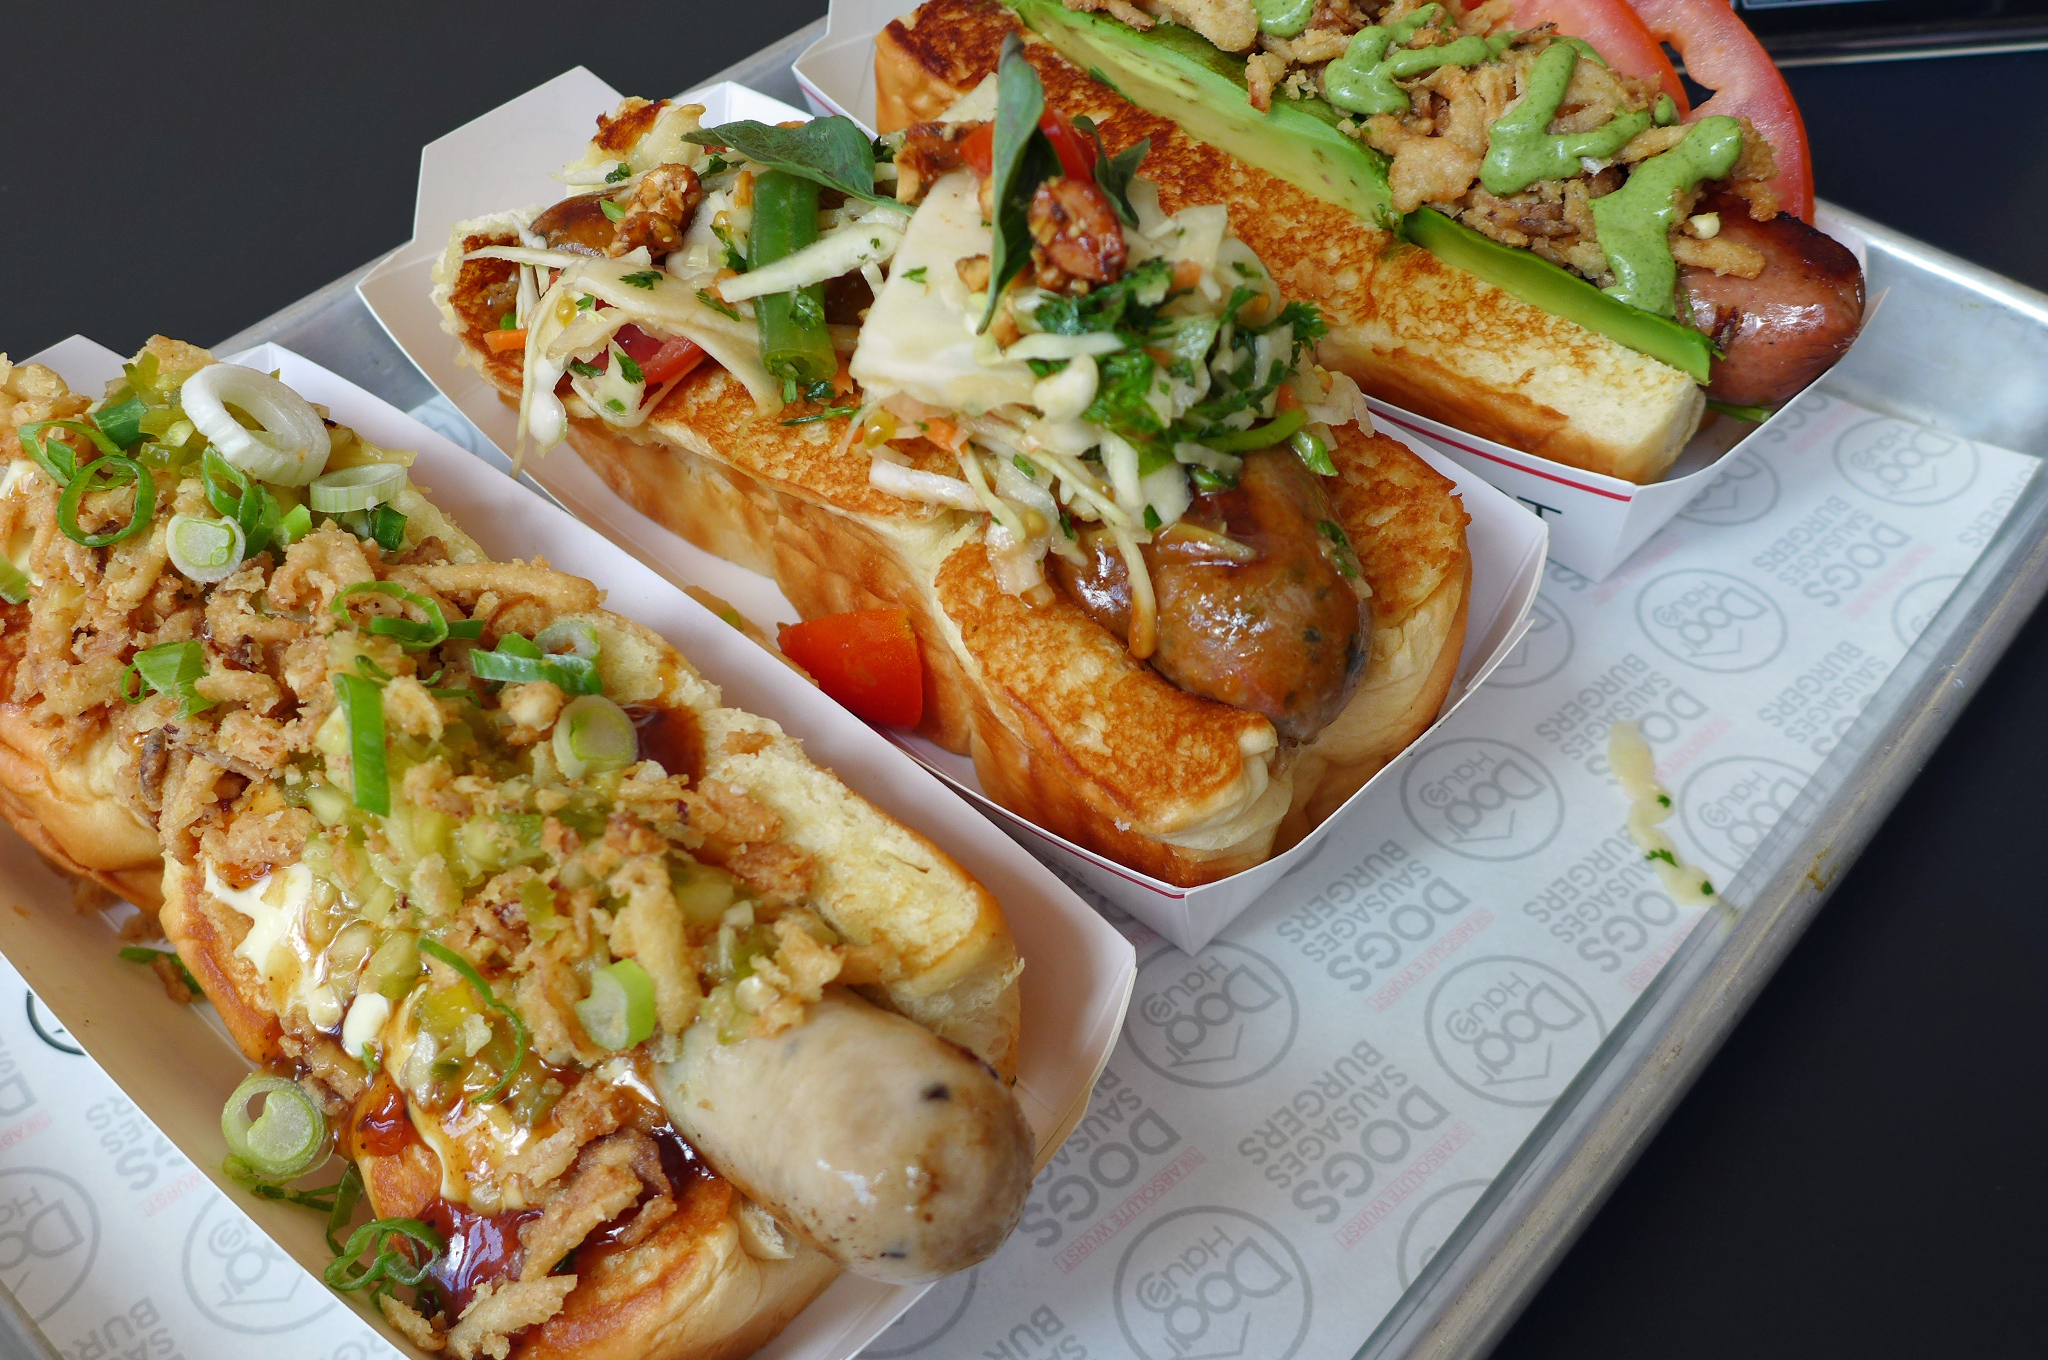 A selection of Dog Haus’ $9 frankfurters